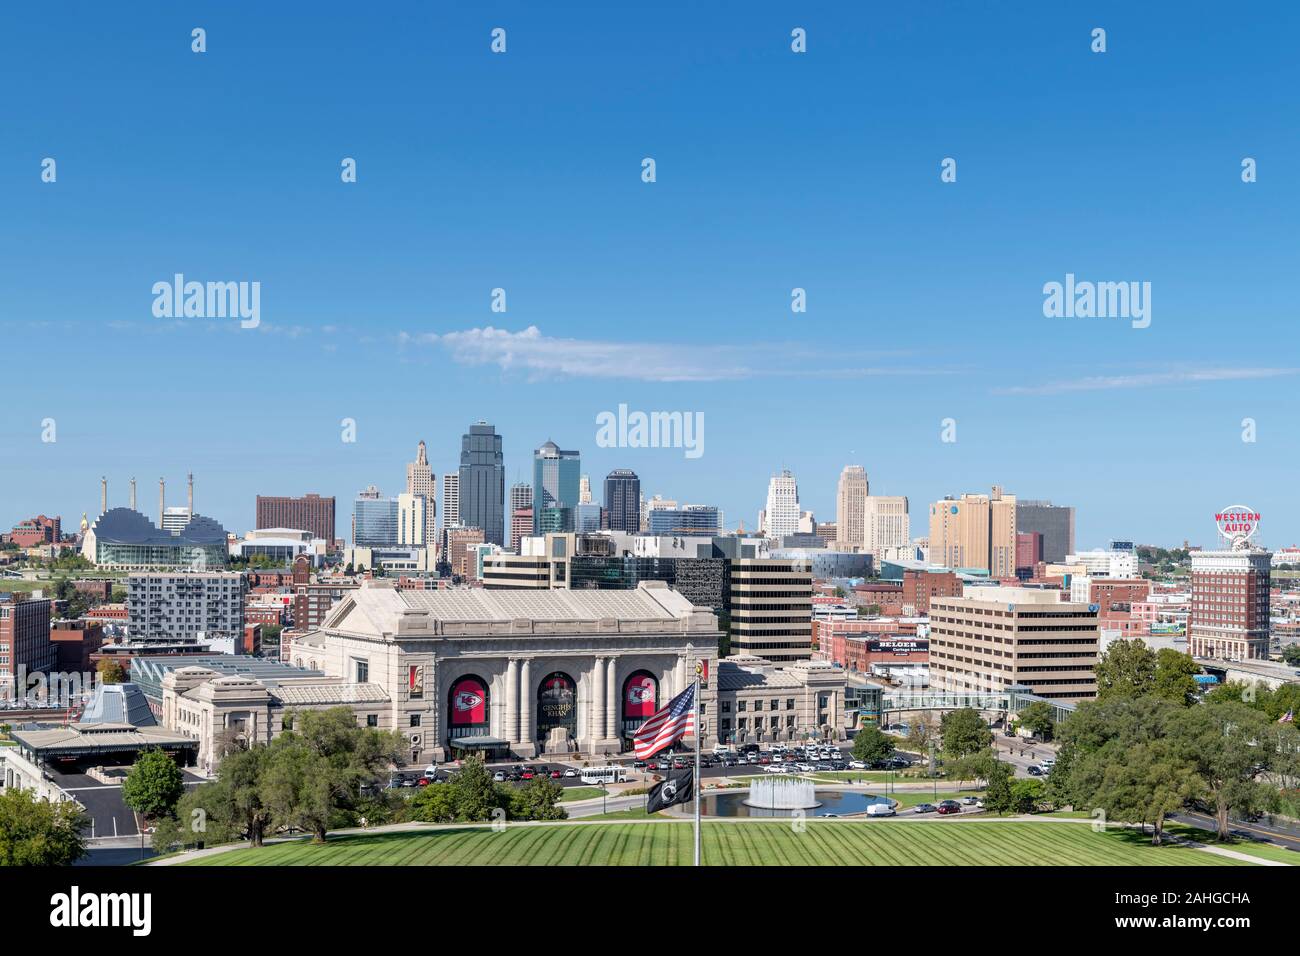 Kansas City skyline. View of downtown from the National World War I Memorial, Kansas City, Missouri, USA. Union Station is in the foreground. Stock Photo